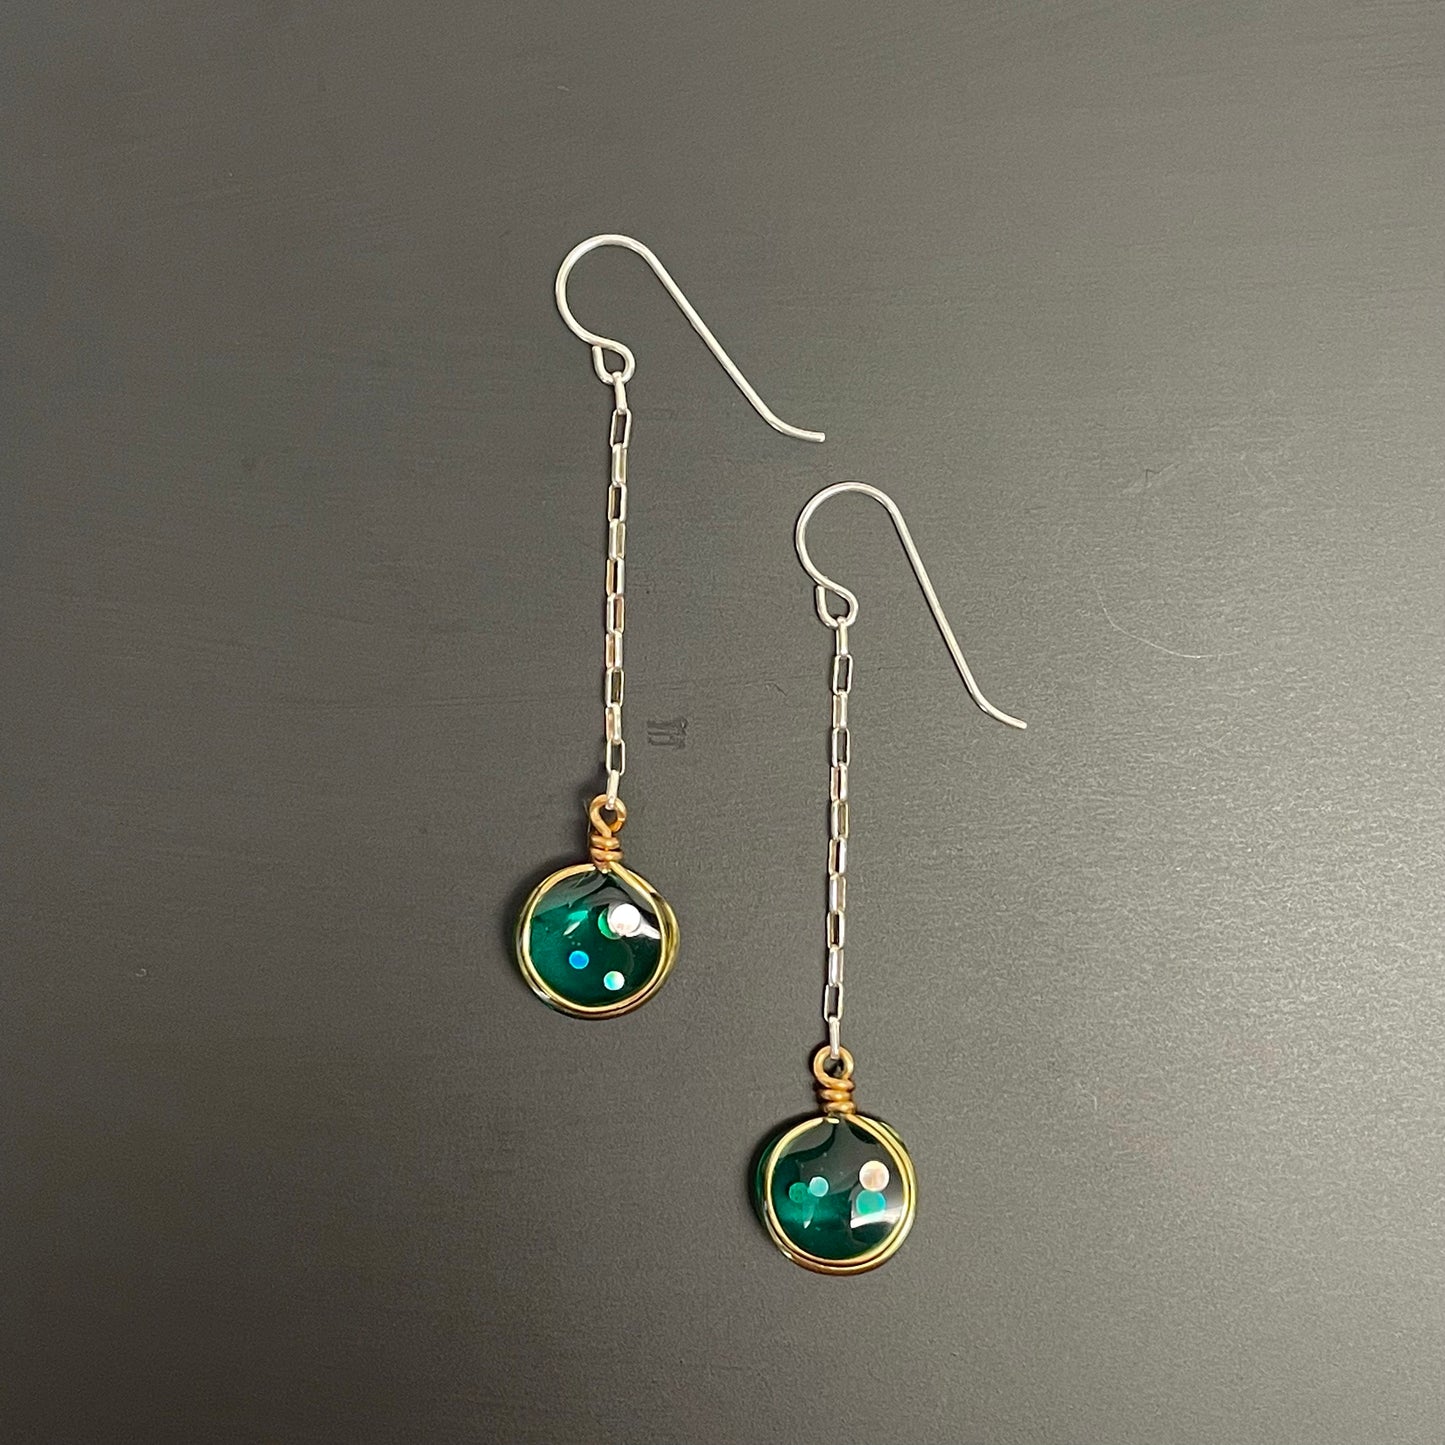 Looking Glass Earrings - Teal Forest